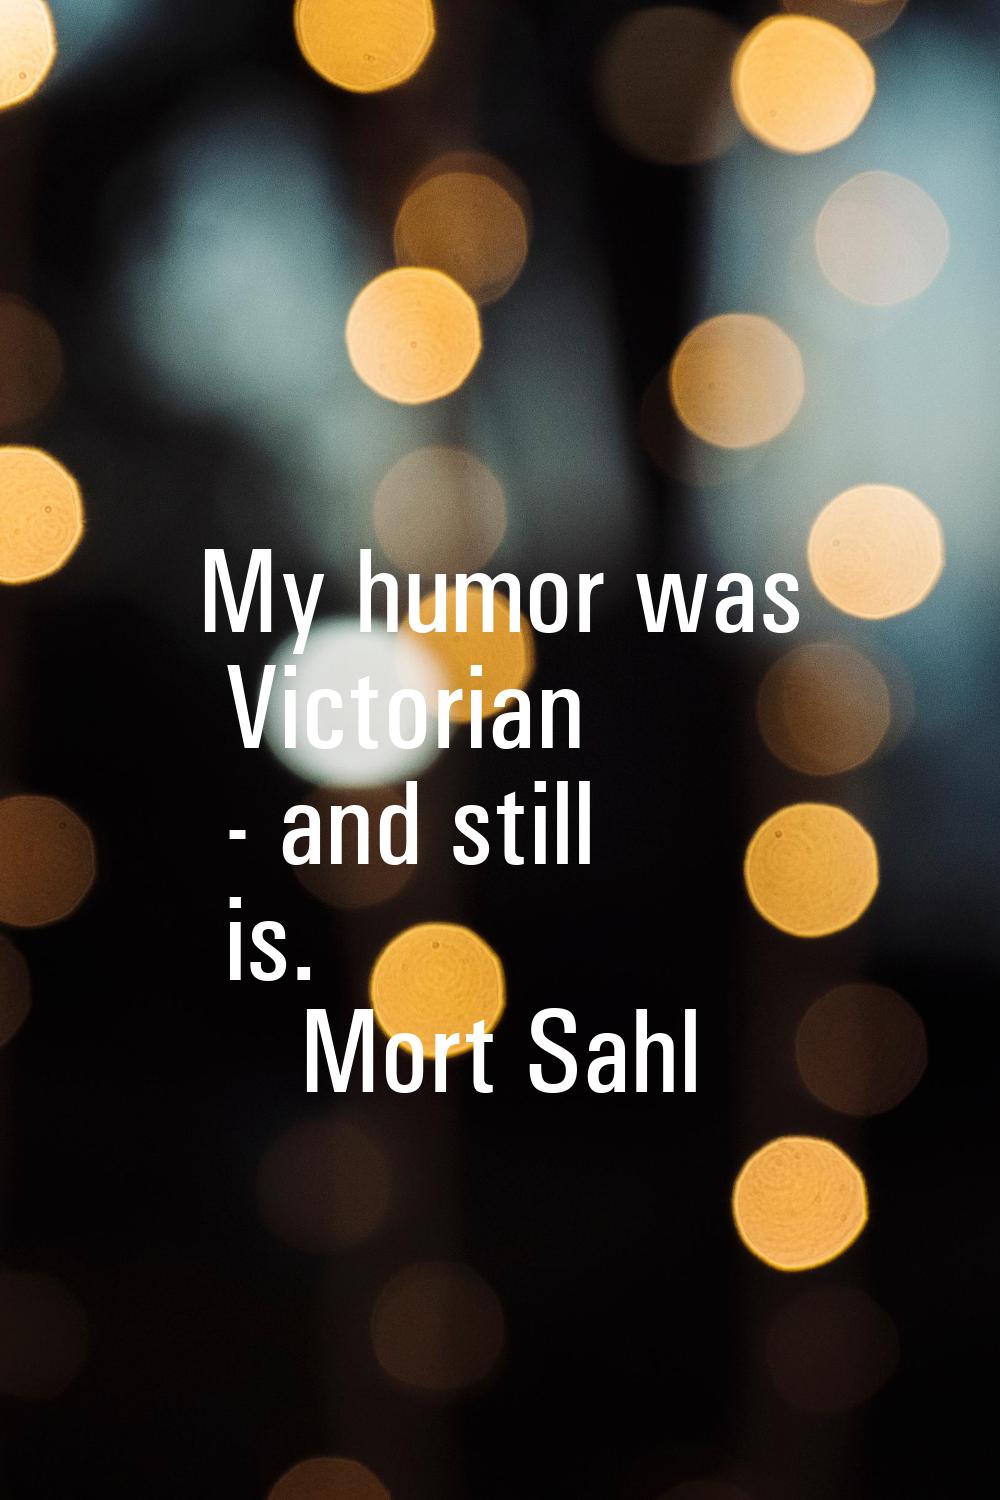 My humor was Victorian - and still is.